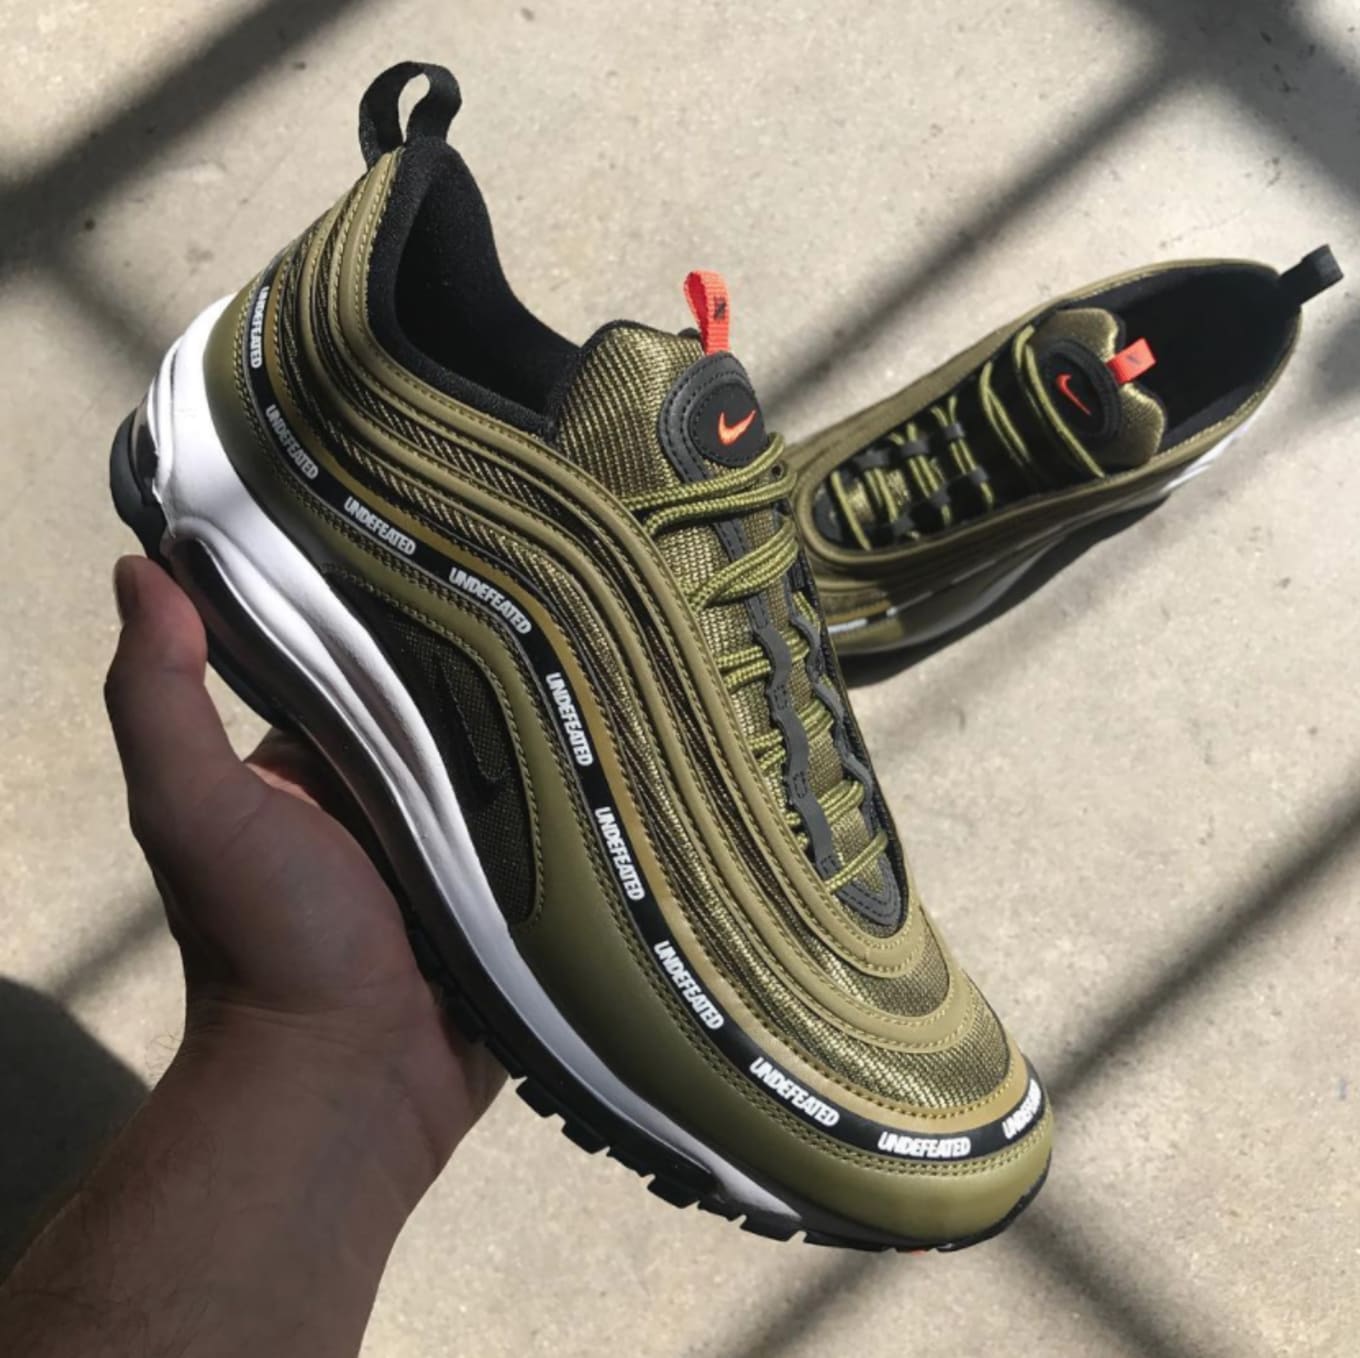 Suradam Search engine marketing Constricted Undefeated Nike Air Max 97 AJ1986-300 Militia Green Flight Jacket Release  Date | Sole Collector